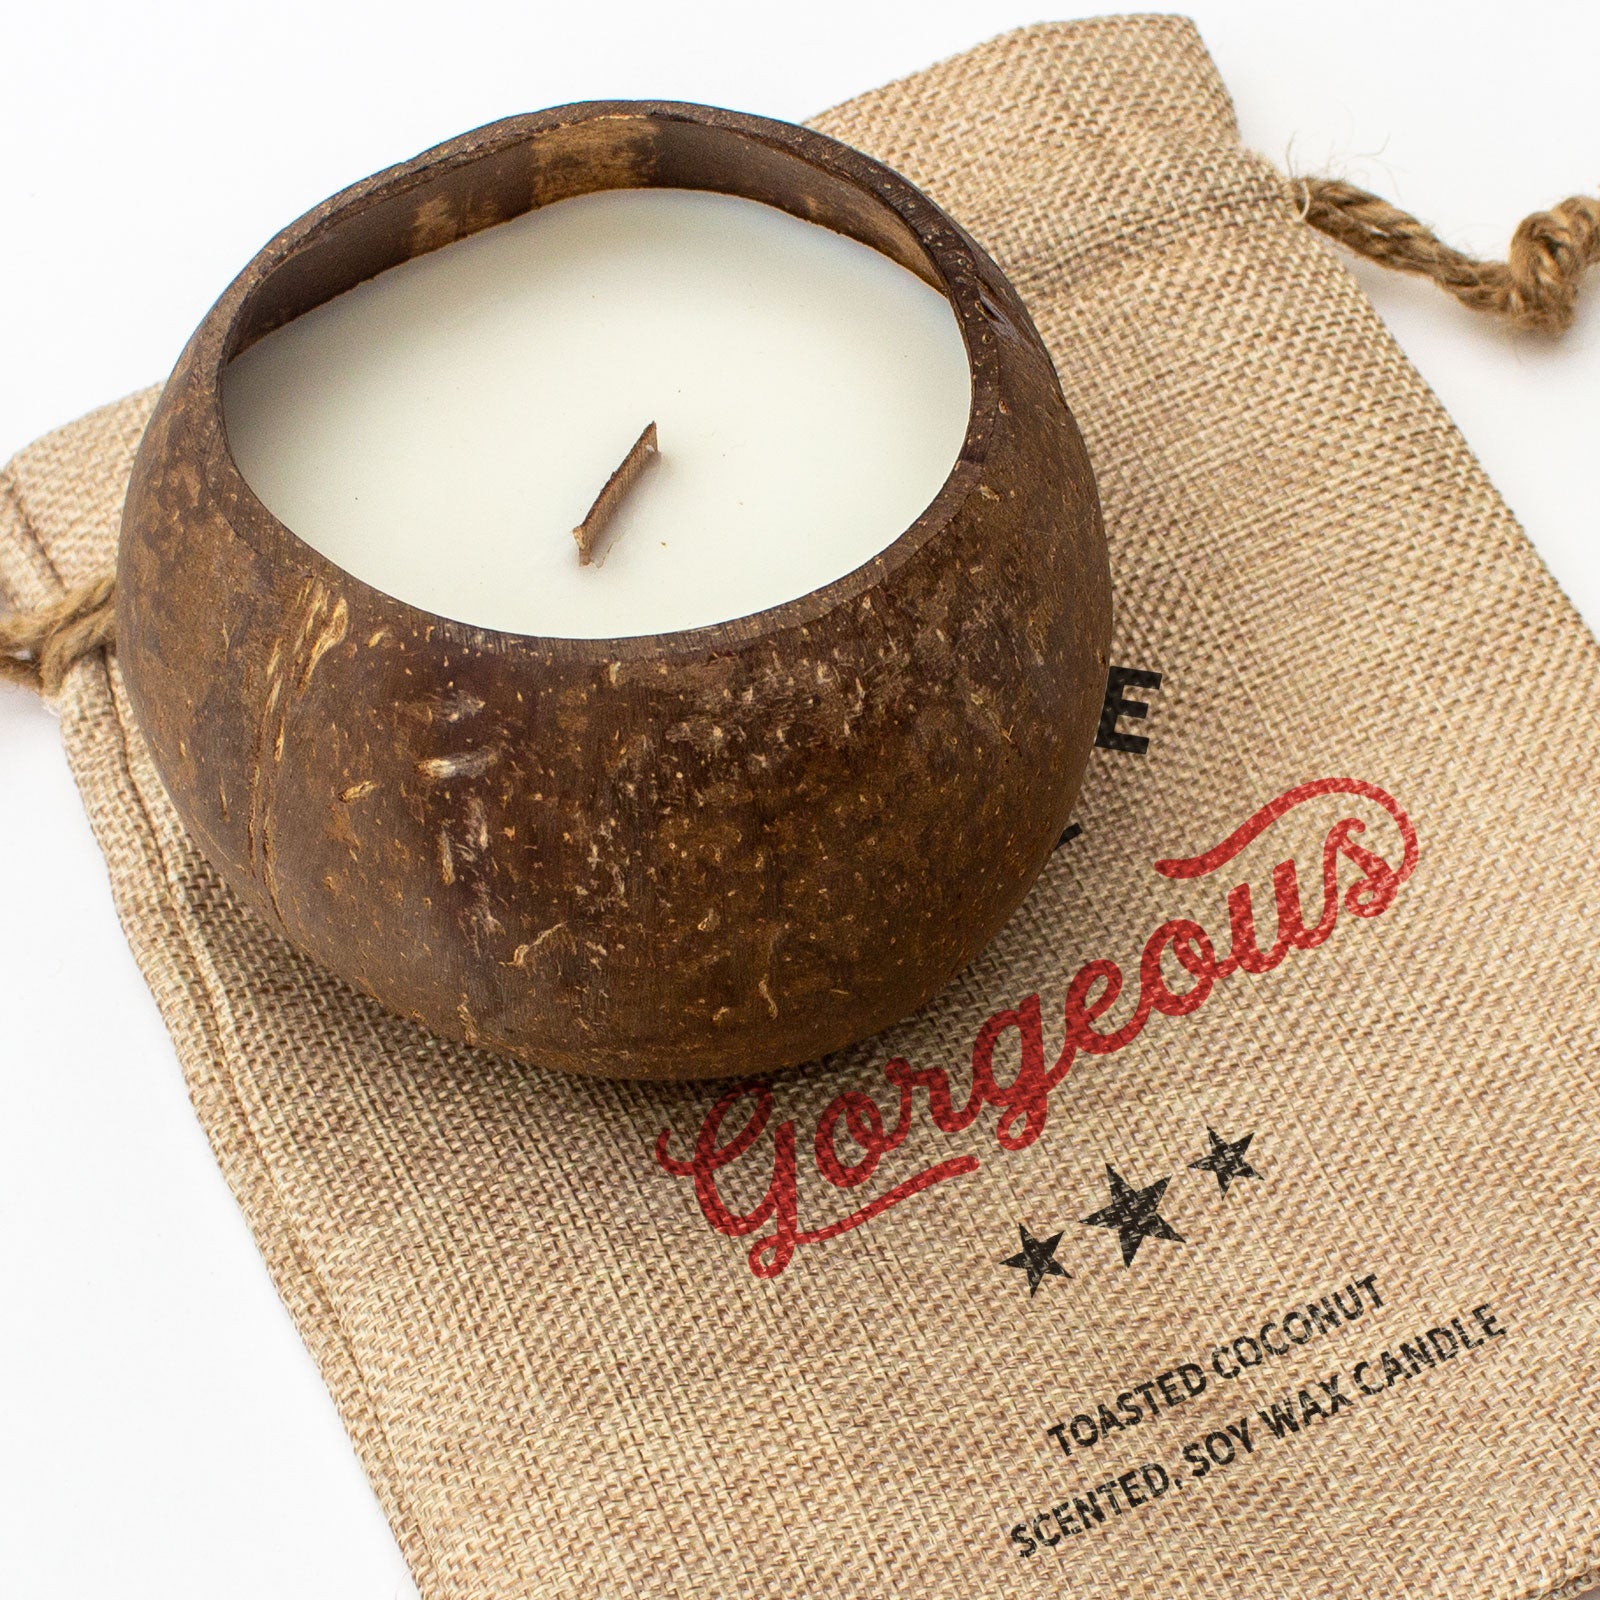 BECAUSE YOU'RE GORGEOUS - Toasted Coconut Bowl Candle – Soy Wax - Gift Present